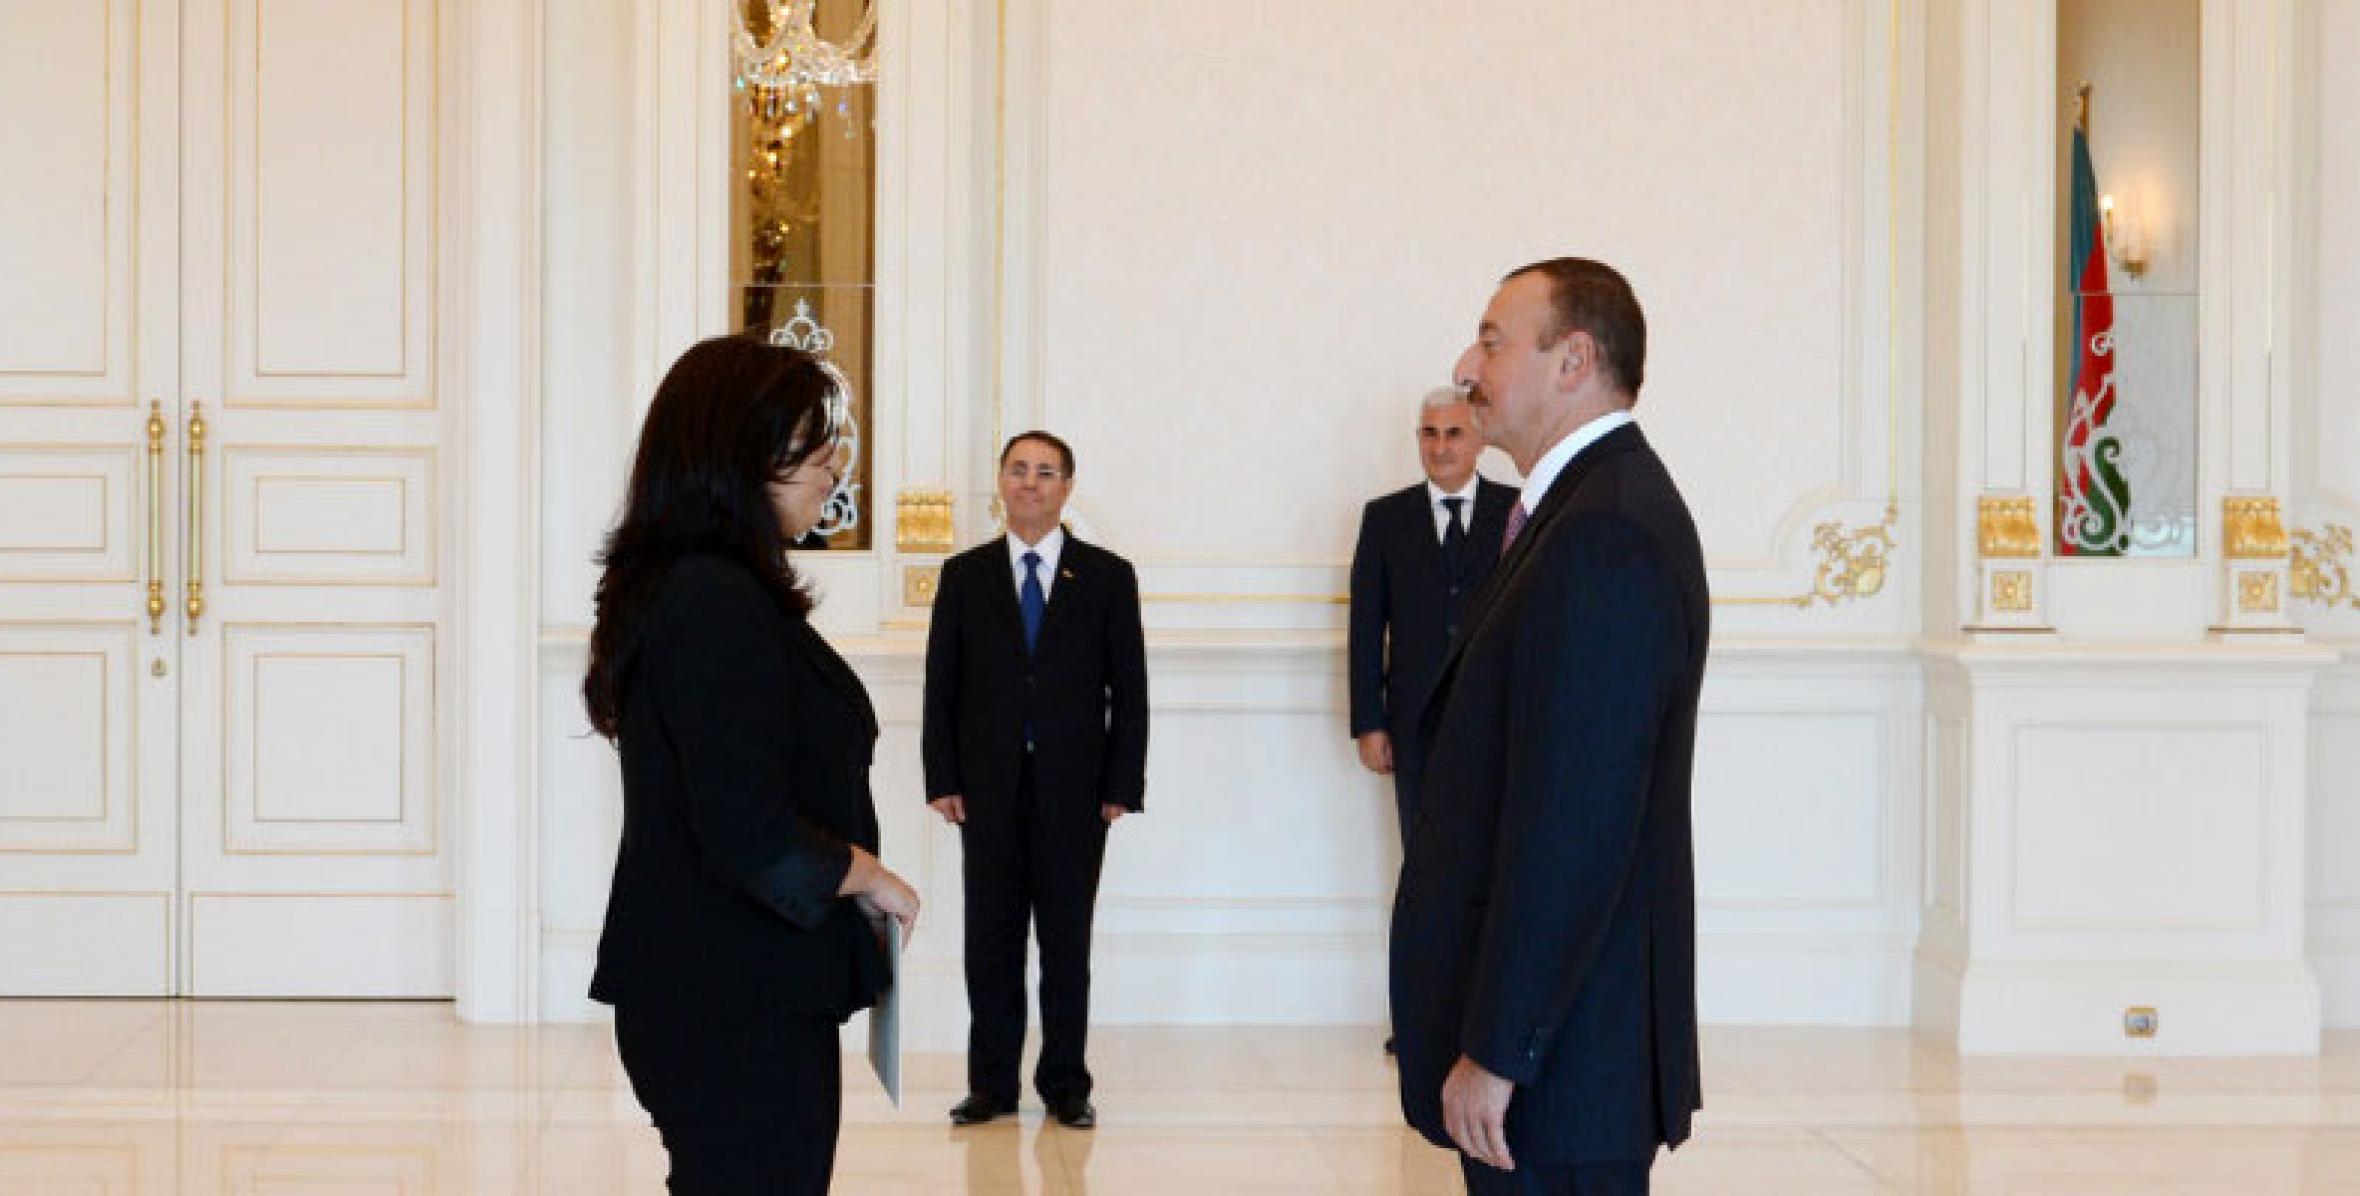 Ilham Aliyev accepted the credentials of the newly-appointed Ambassador Extraordinary and Plenipotentiary of Bulgaria to Azerbaijan